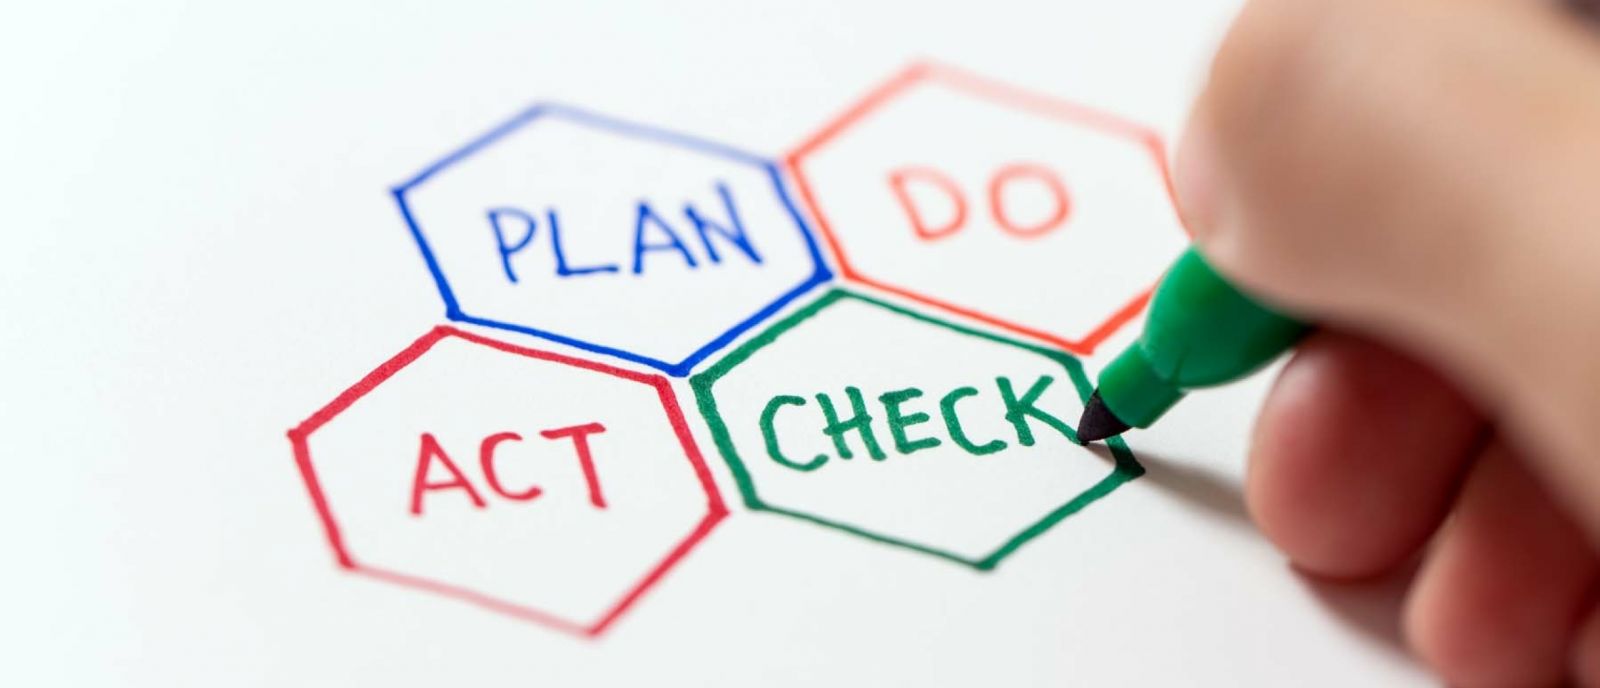 The PDCA model explained